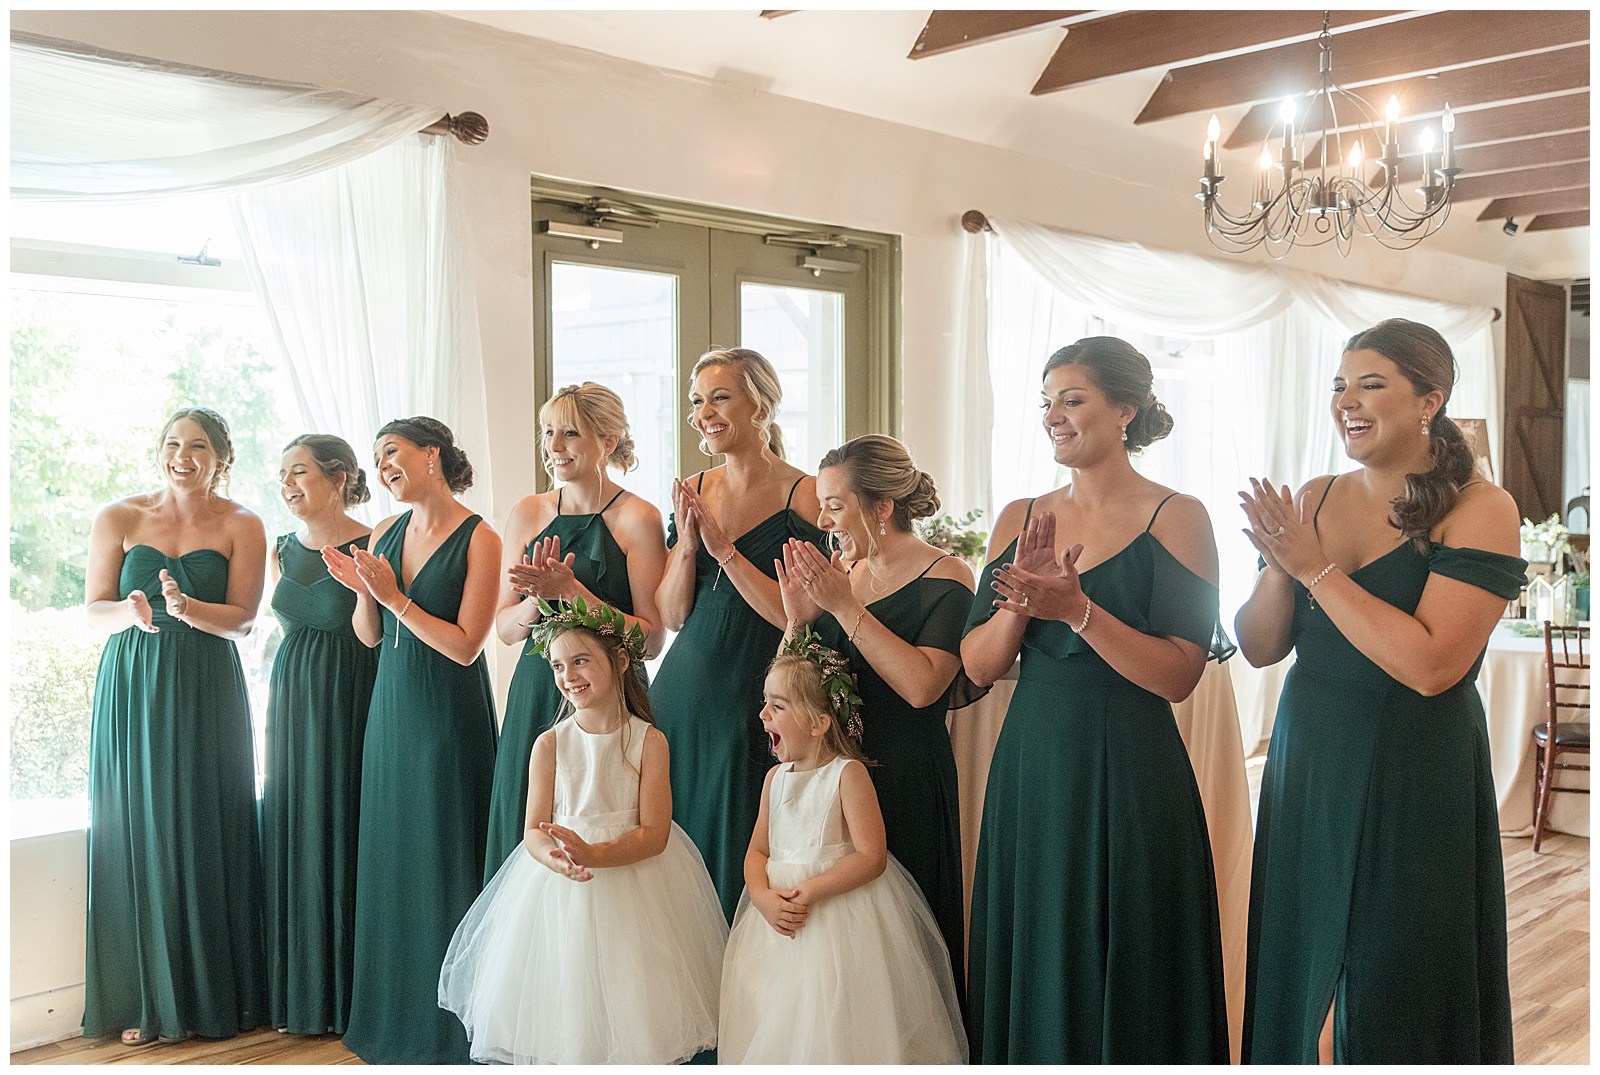 bridesmaids in dark green gowns and two flower girls in white dresses all seeing the bride in her gown in harrisburg pennsylvania